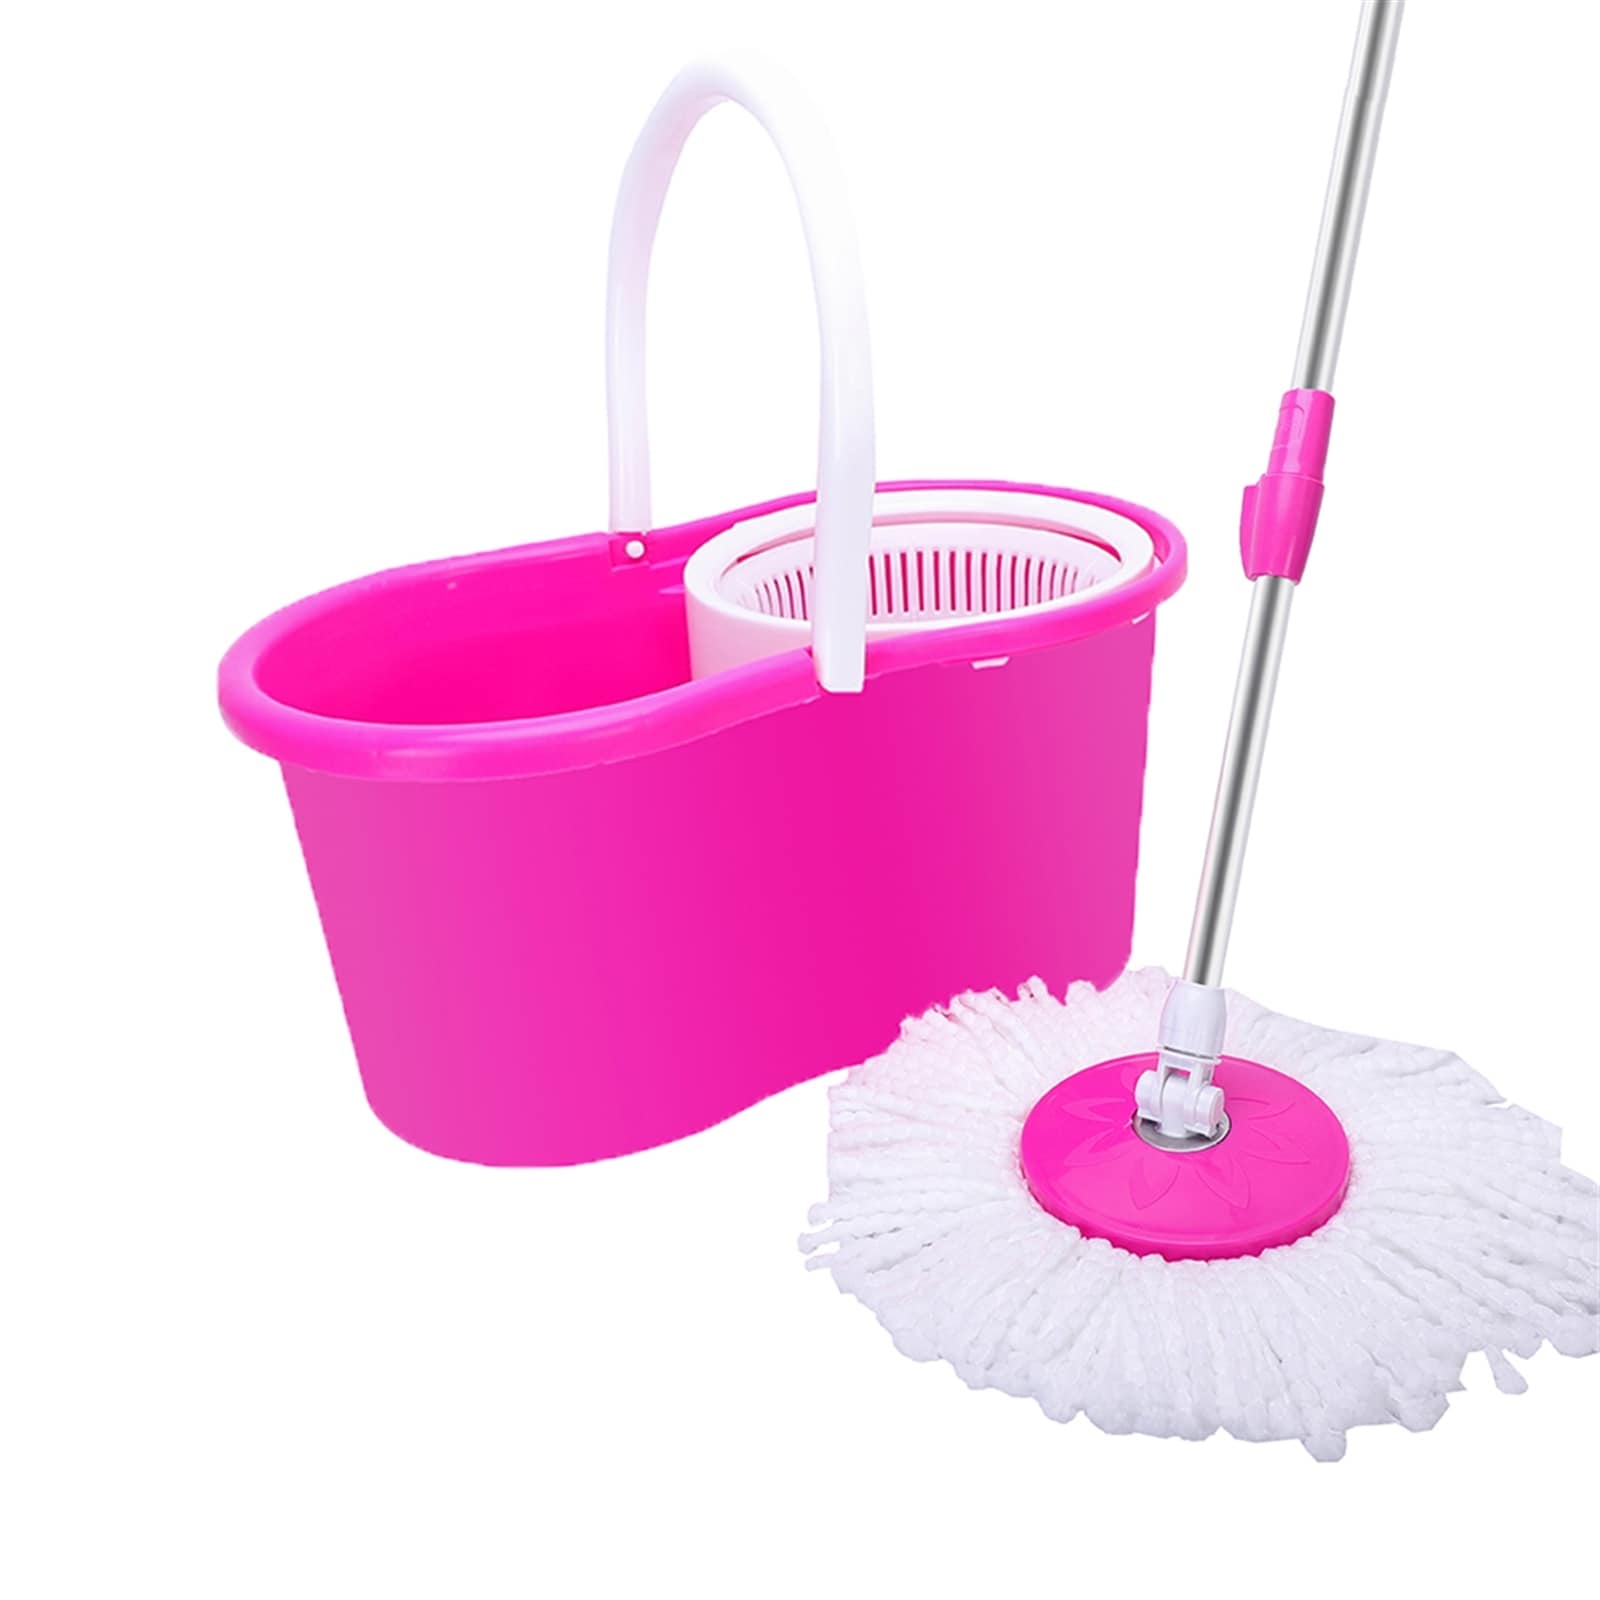 https://ak1.ostkcdn.com/images/products/is/images/direct/cf4d6616abeb60e605a0bcac8aad32eec6c02901/360%C2%B0-Spin-Mop-with-Bucket-%26-Dual-Mop-Heads.jpg